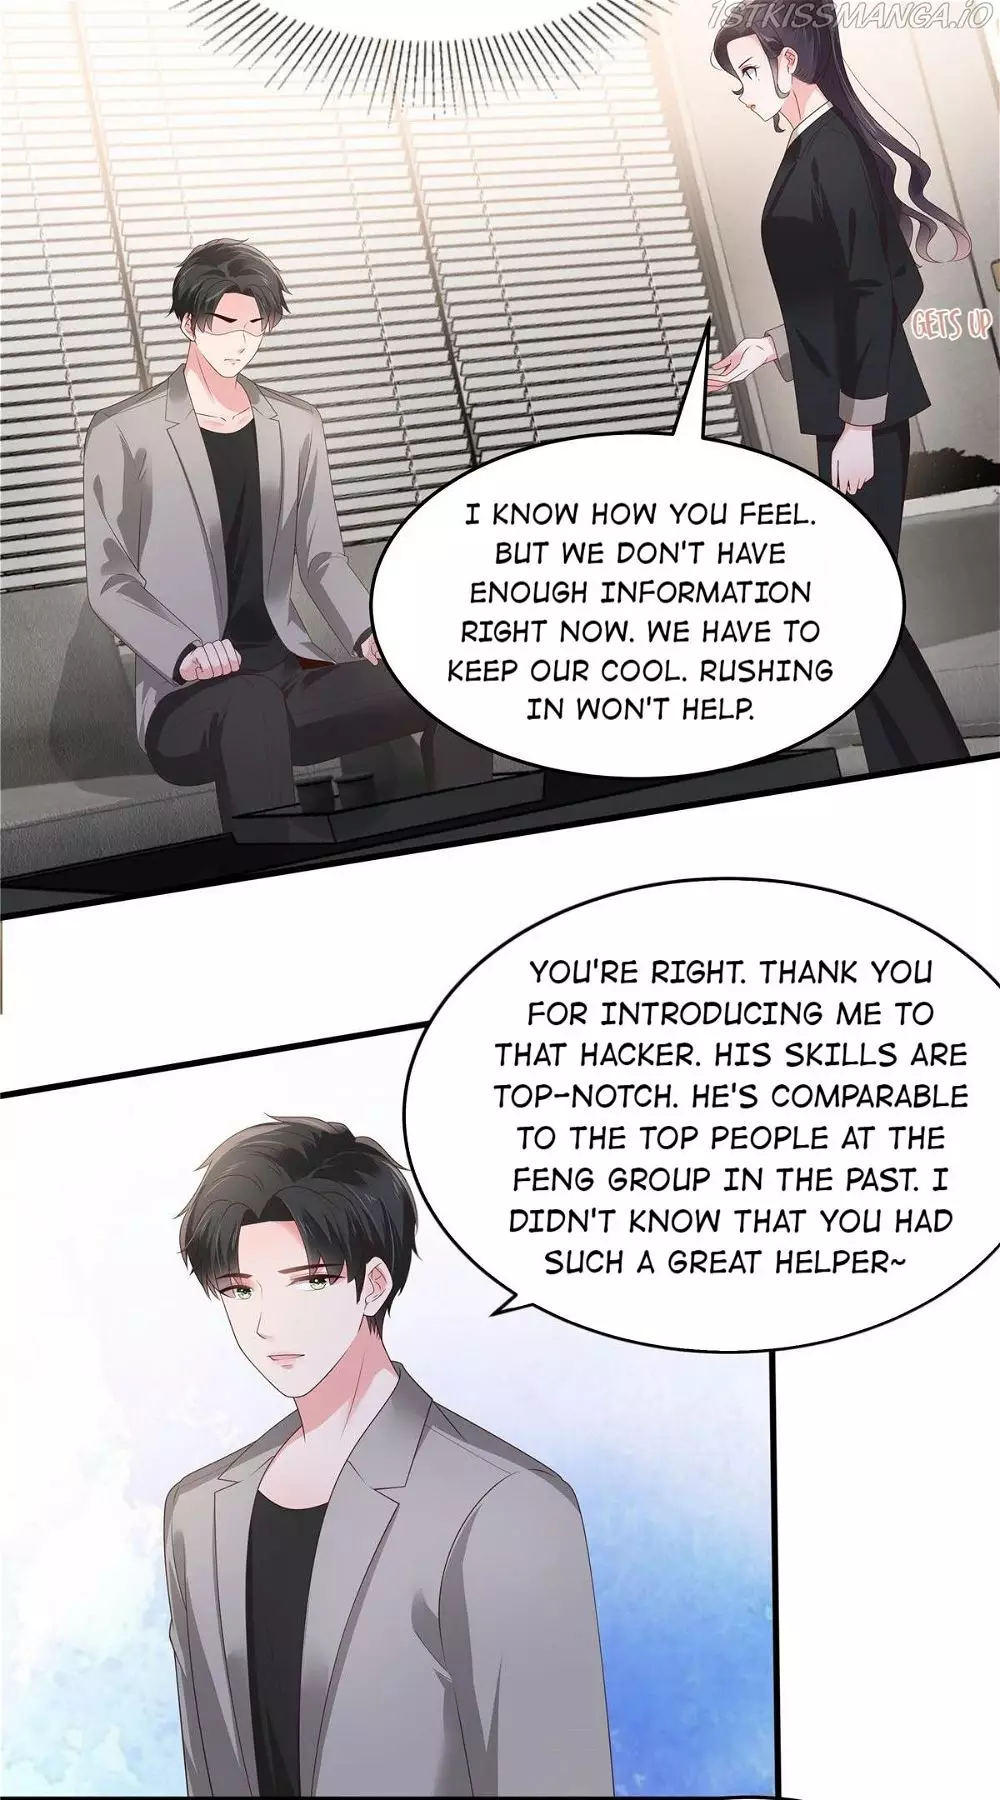 Rebirth Meeting: For You And My Exclusive Lovers - 150 page 14-419eb64b